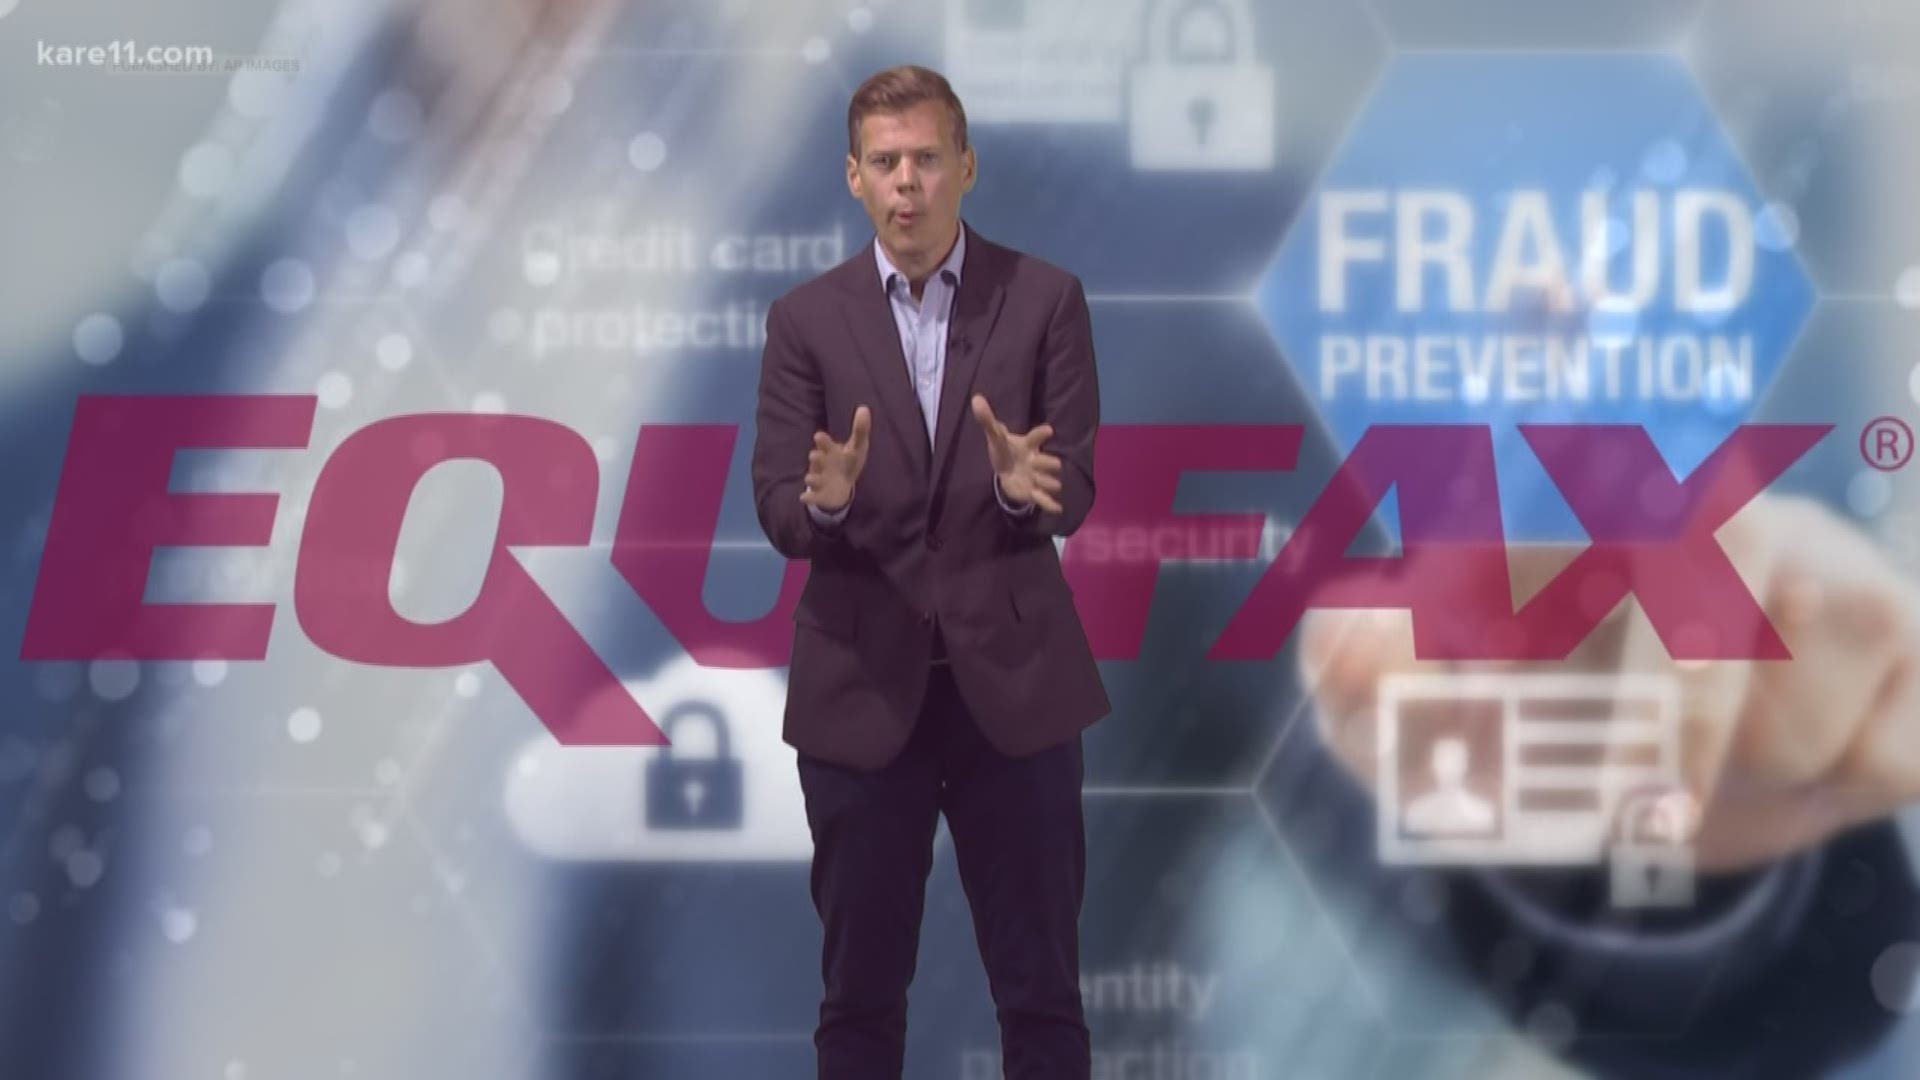 Most people impacted by the Equifax breach can choose between 10 years of free credit monitoring or a $125 dollar payment, but before you take the money consider this video.